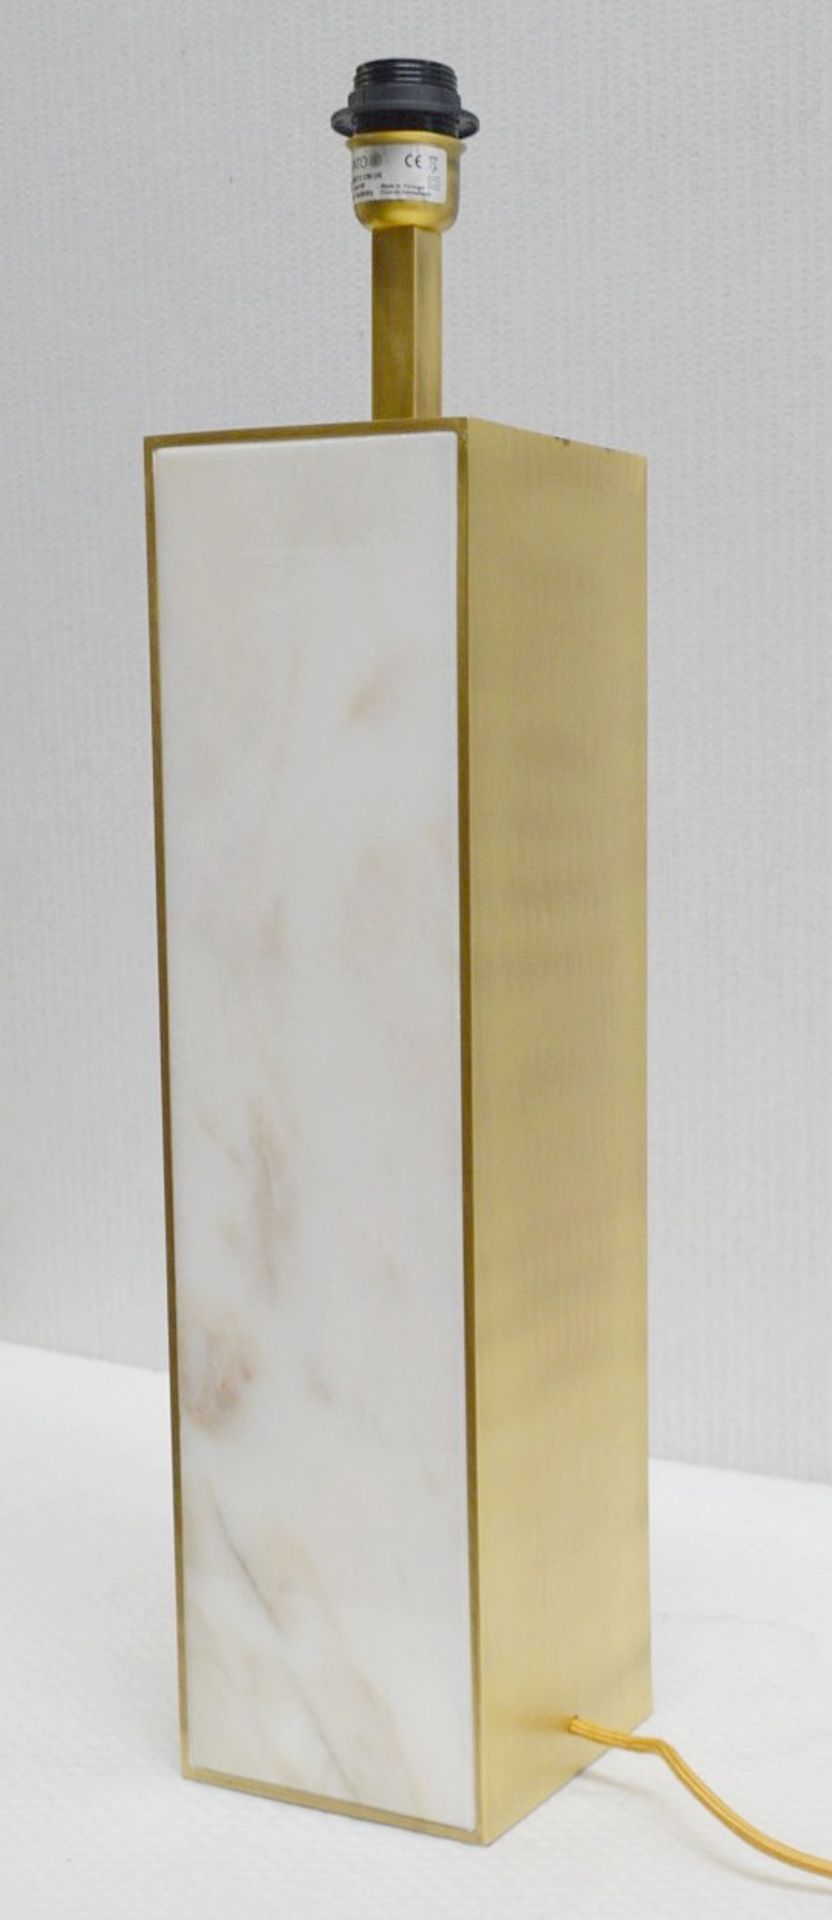 1 x FRATO BIARRITZ Luxury Table Lamp With A Variegated Stone & Brass Base - Original RRP £1,544 - Image 6 of 15